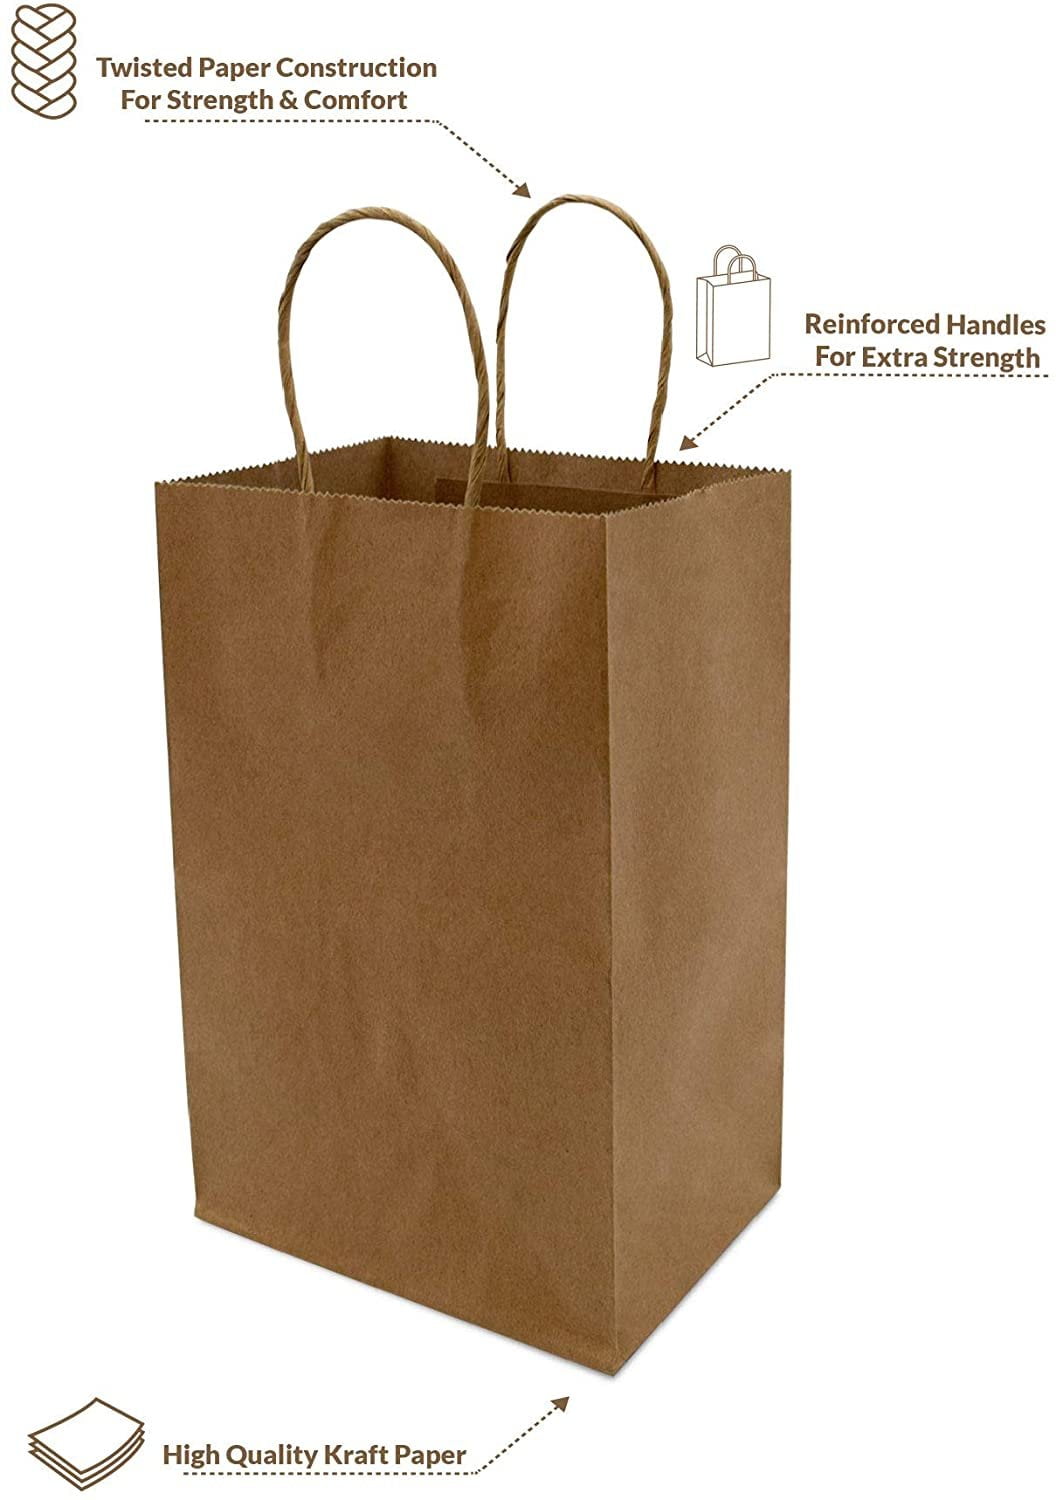 10x5x13 Brown Kraft Paper Bags with Handles Merchandise Shopping Restaurant takeouts Birthday Parties Retail Gift Bags 25 Pcs Party 